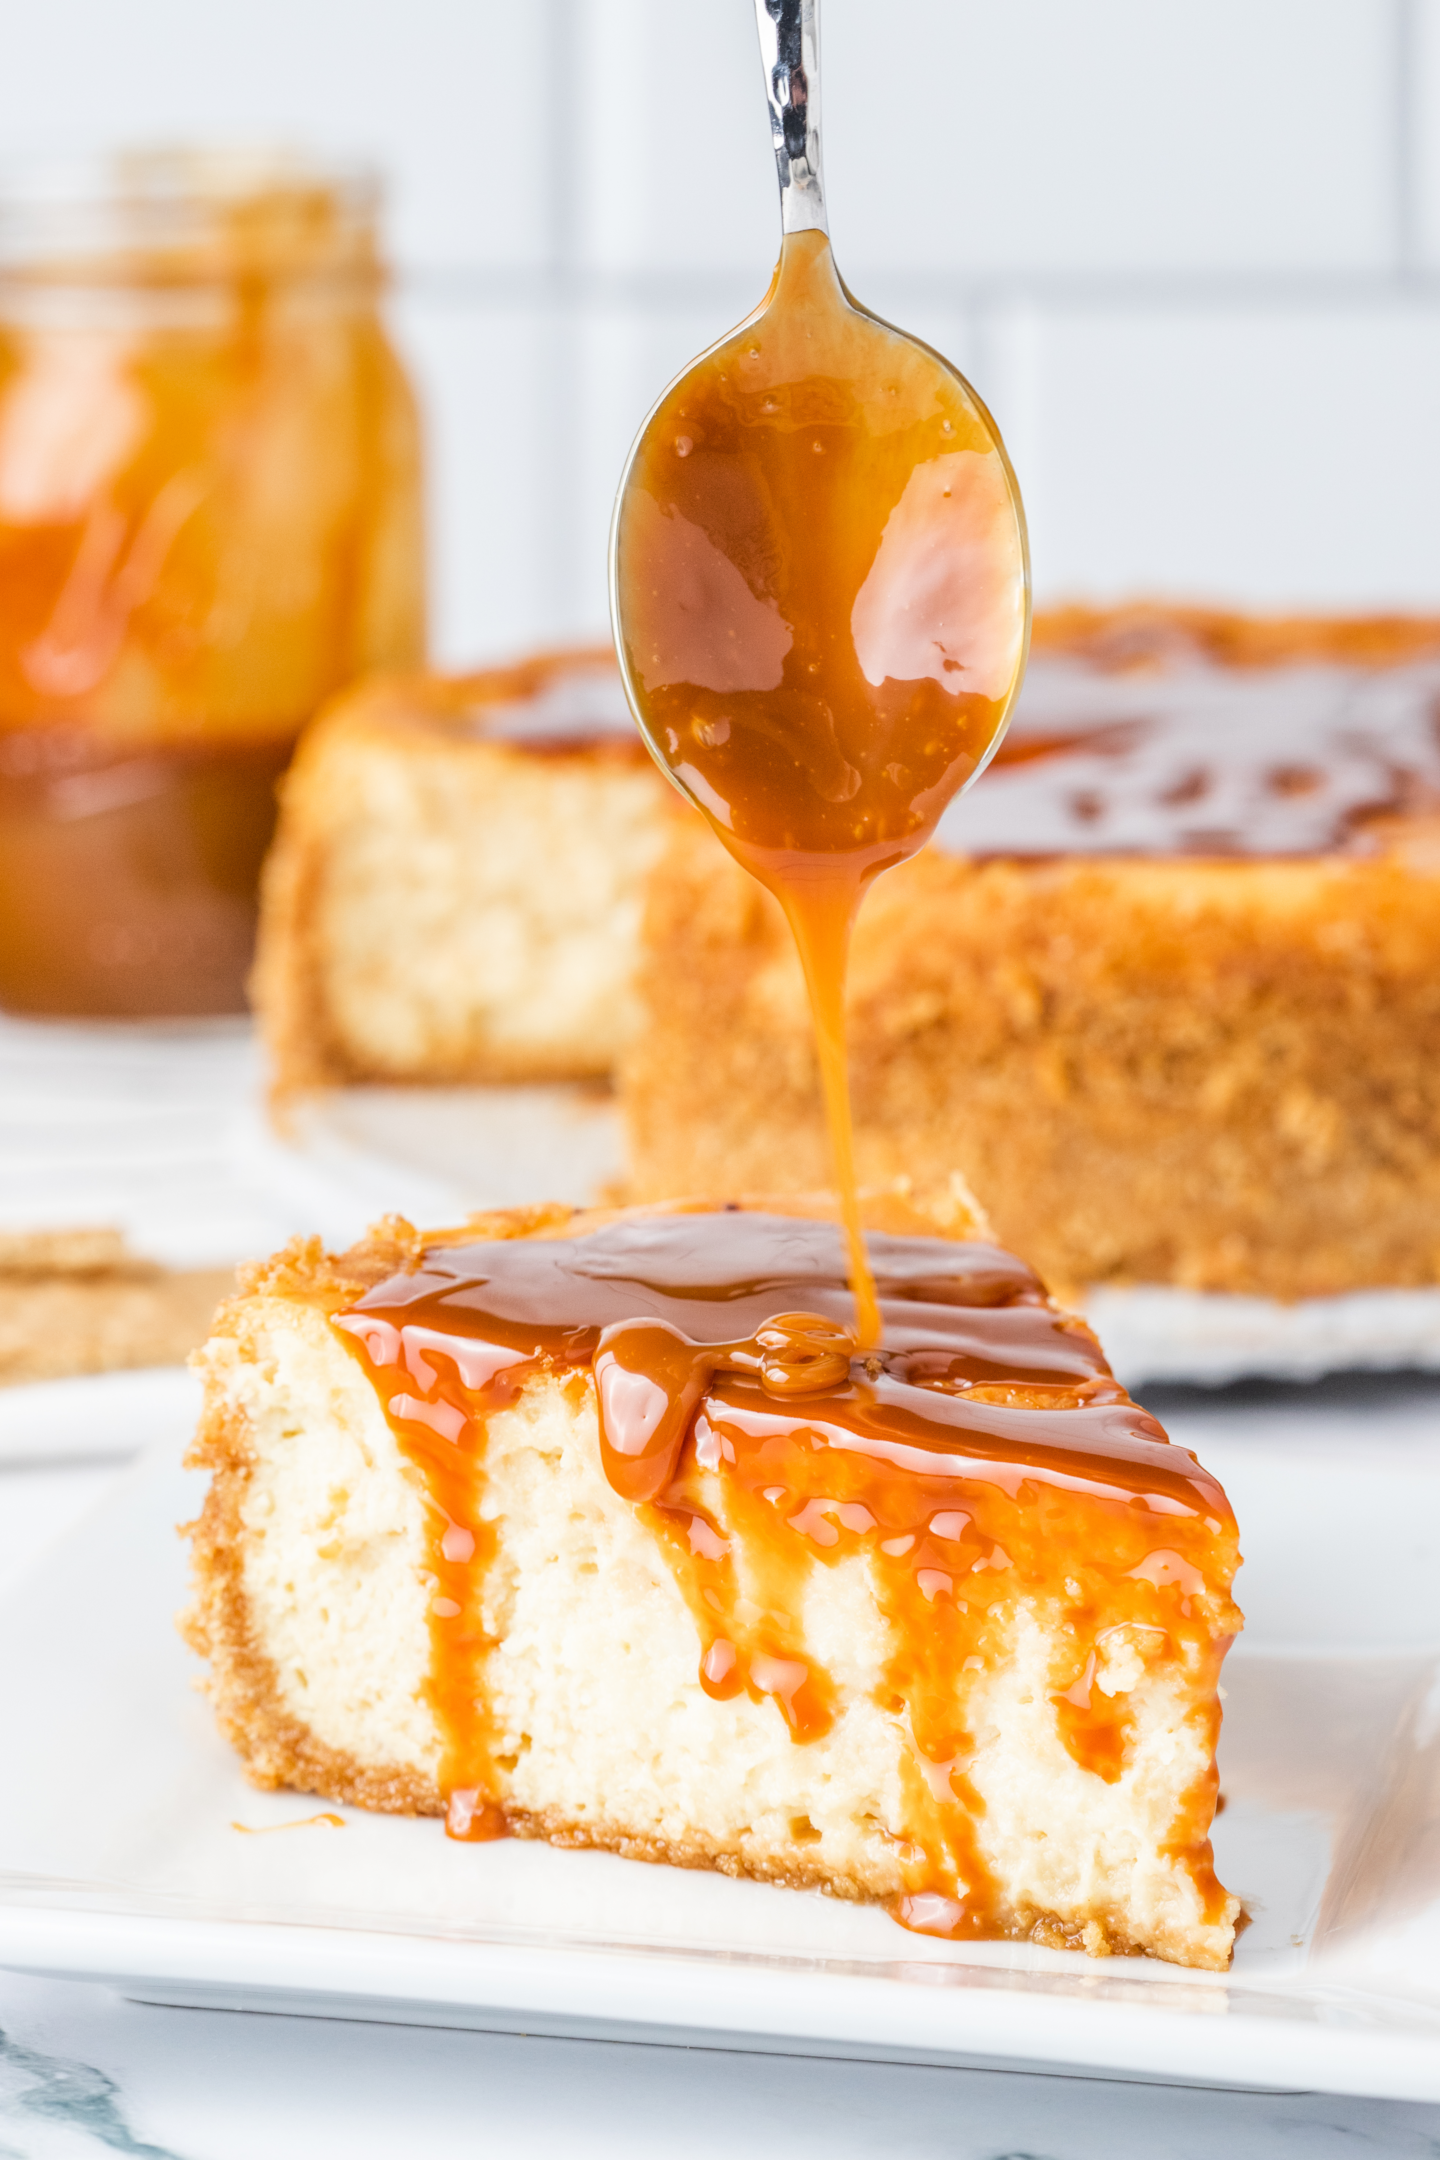 spoon drizzling caramel sauce onto slice of cheesecake